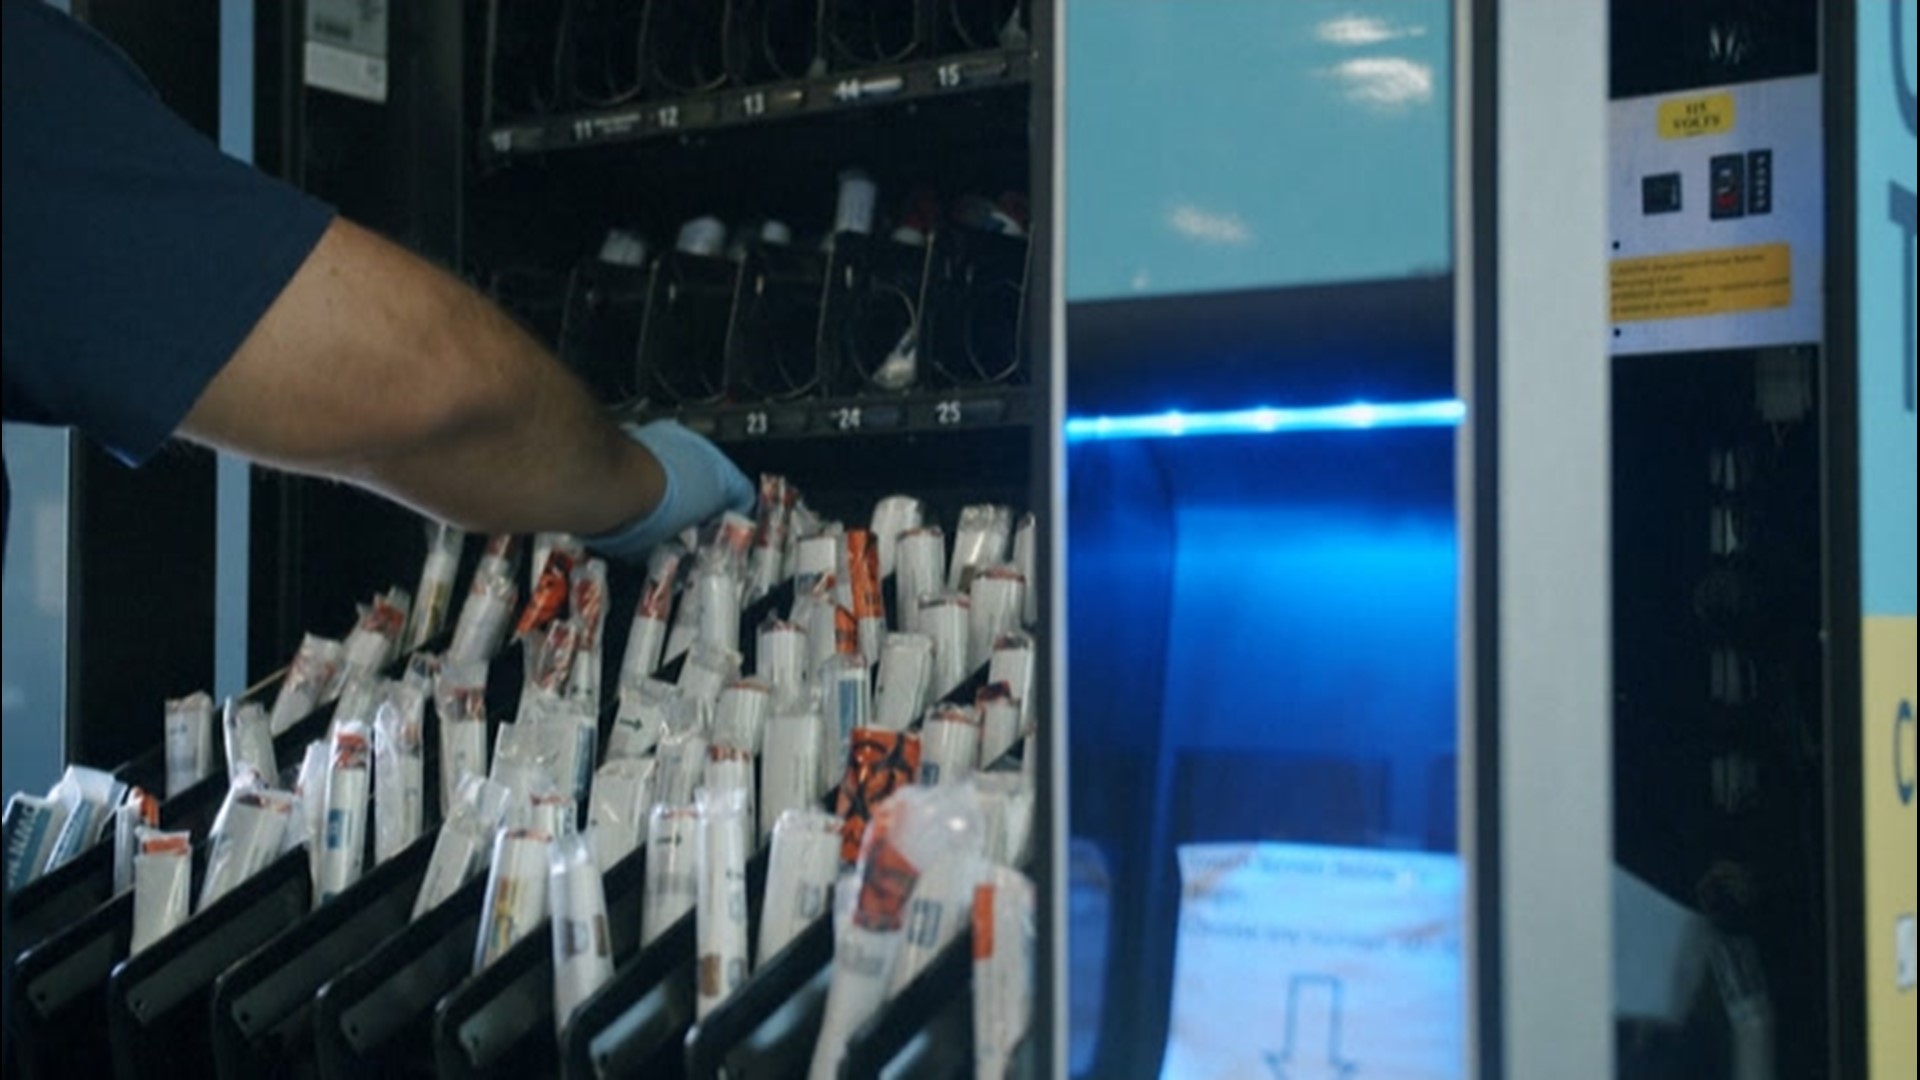 Vending machines are popping up on the campus of the University of California San Diego. But they aren't for candy or soda. They're for COVID-19 test kits. And students say they're extremely helpful.